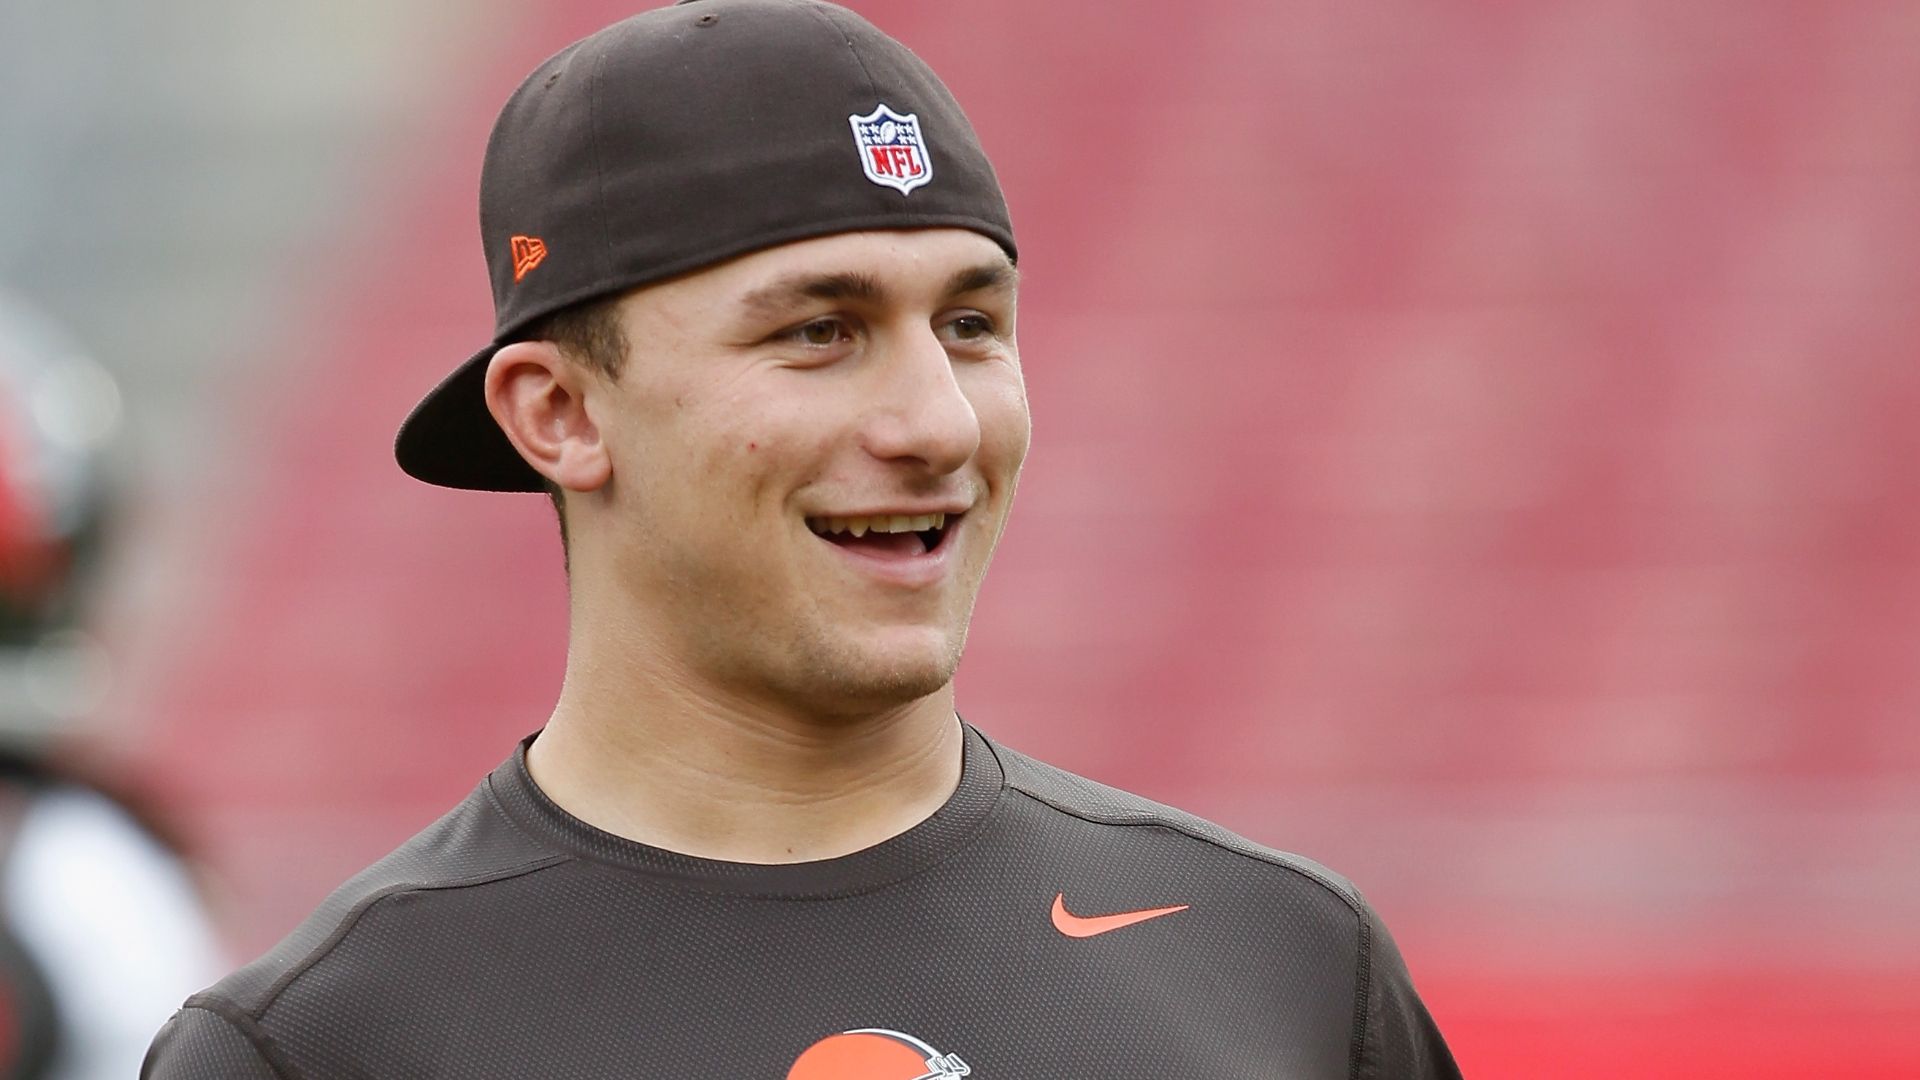 Peter King: Teams were swayed Manziel was changing his life